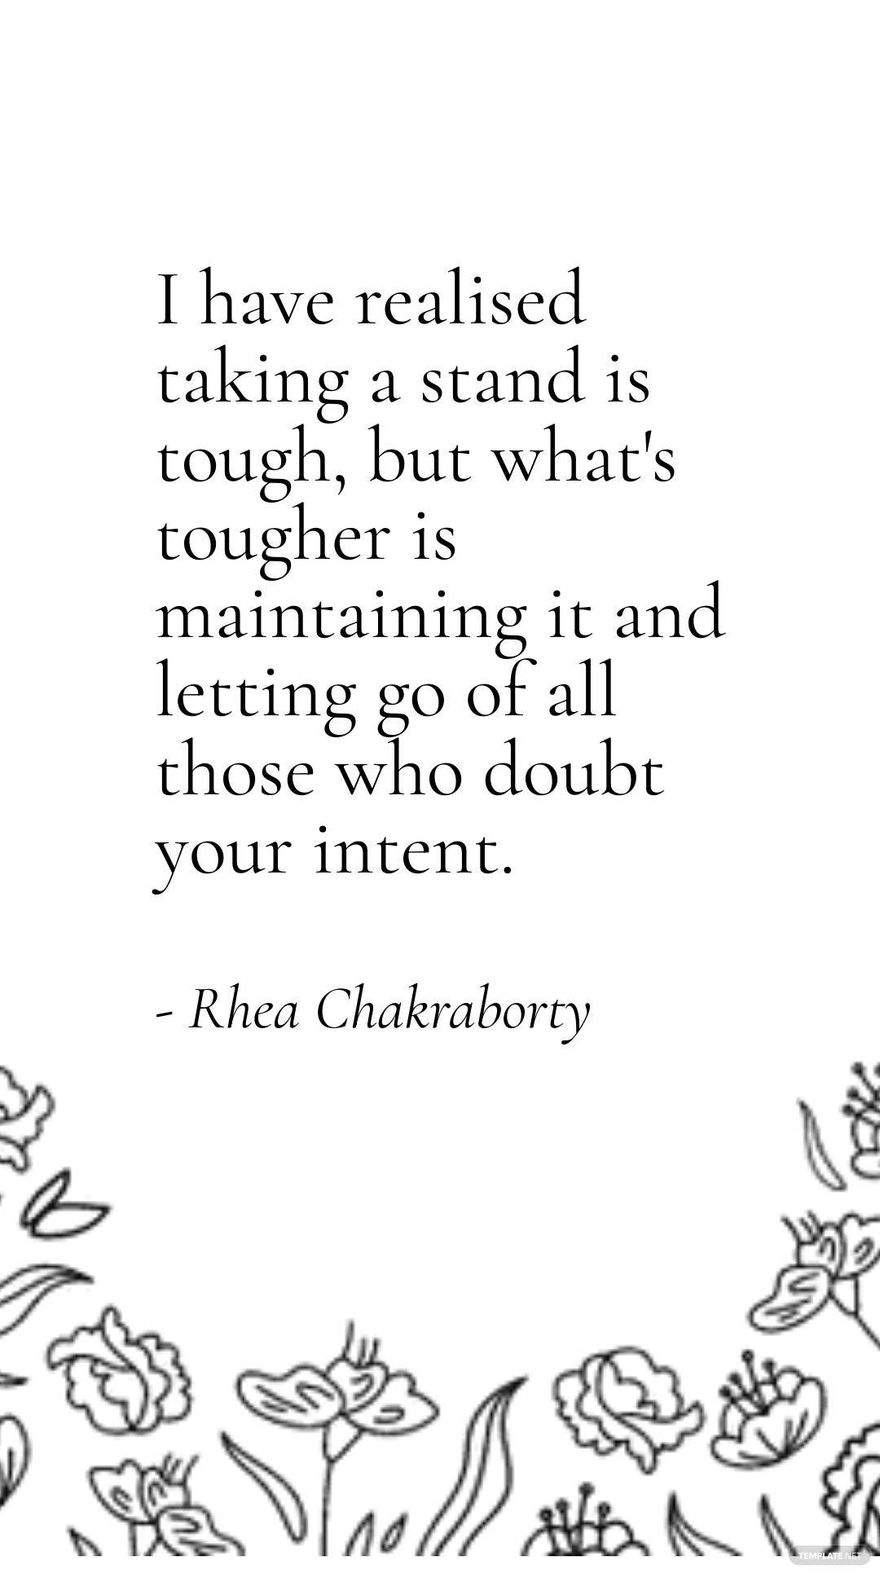 Rhea Chakraborty - I have realised taking a stand is tough, but what's tougher is maintaining it and letting go of all those who doubt your intent.